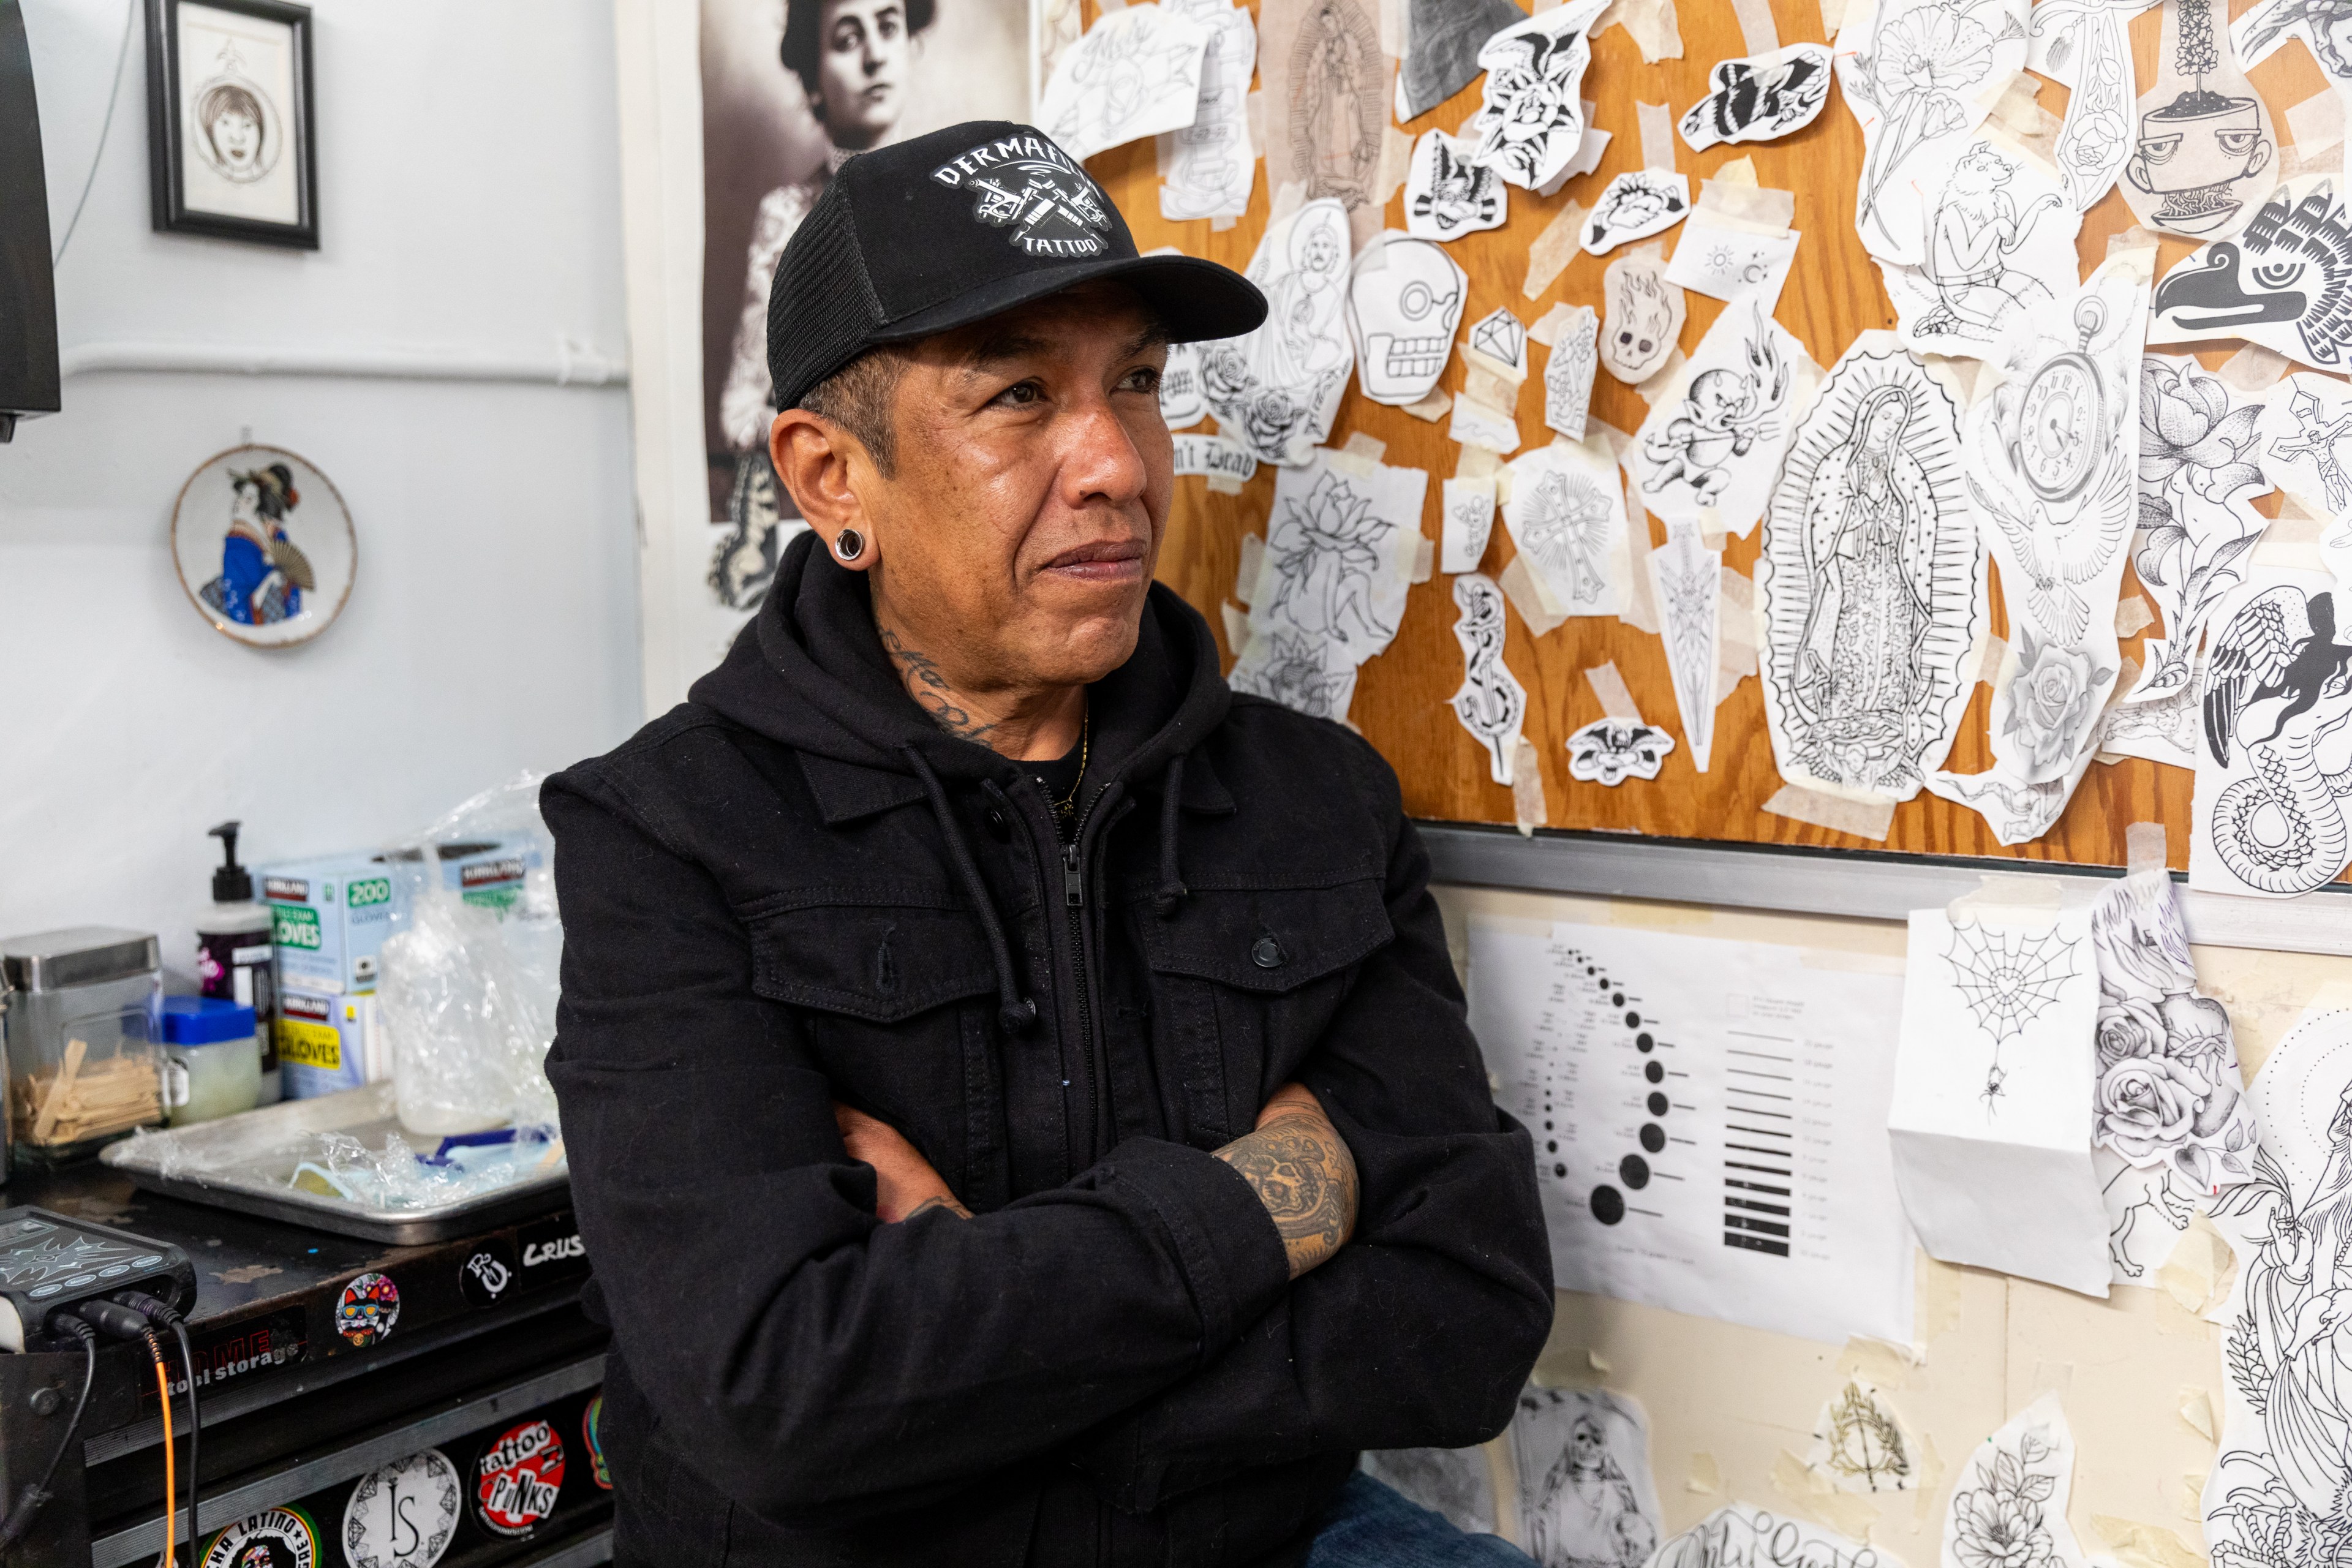 Roberto Barriga with tattoos, wearing a black jacket and cap, stands in a tattoo studio. The wall behind them is covered with various tattoo design sketches.